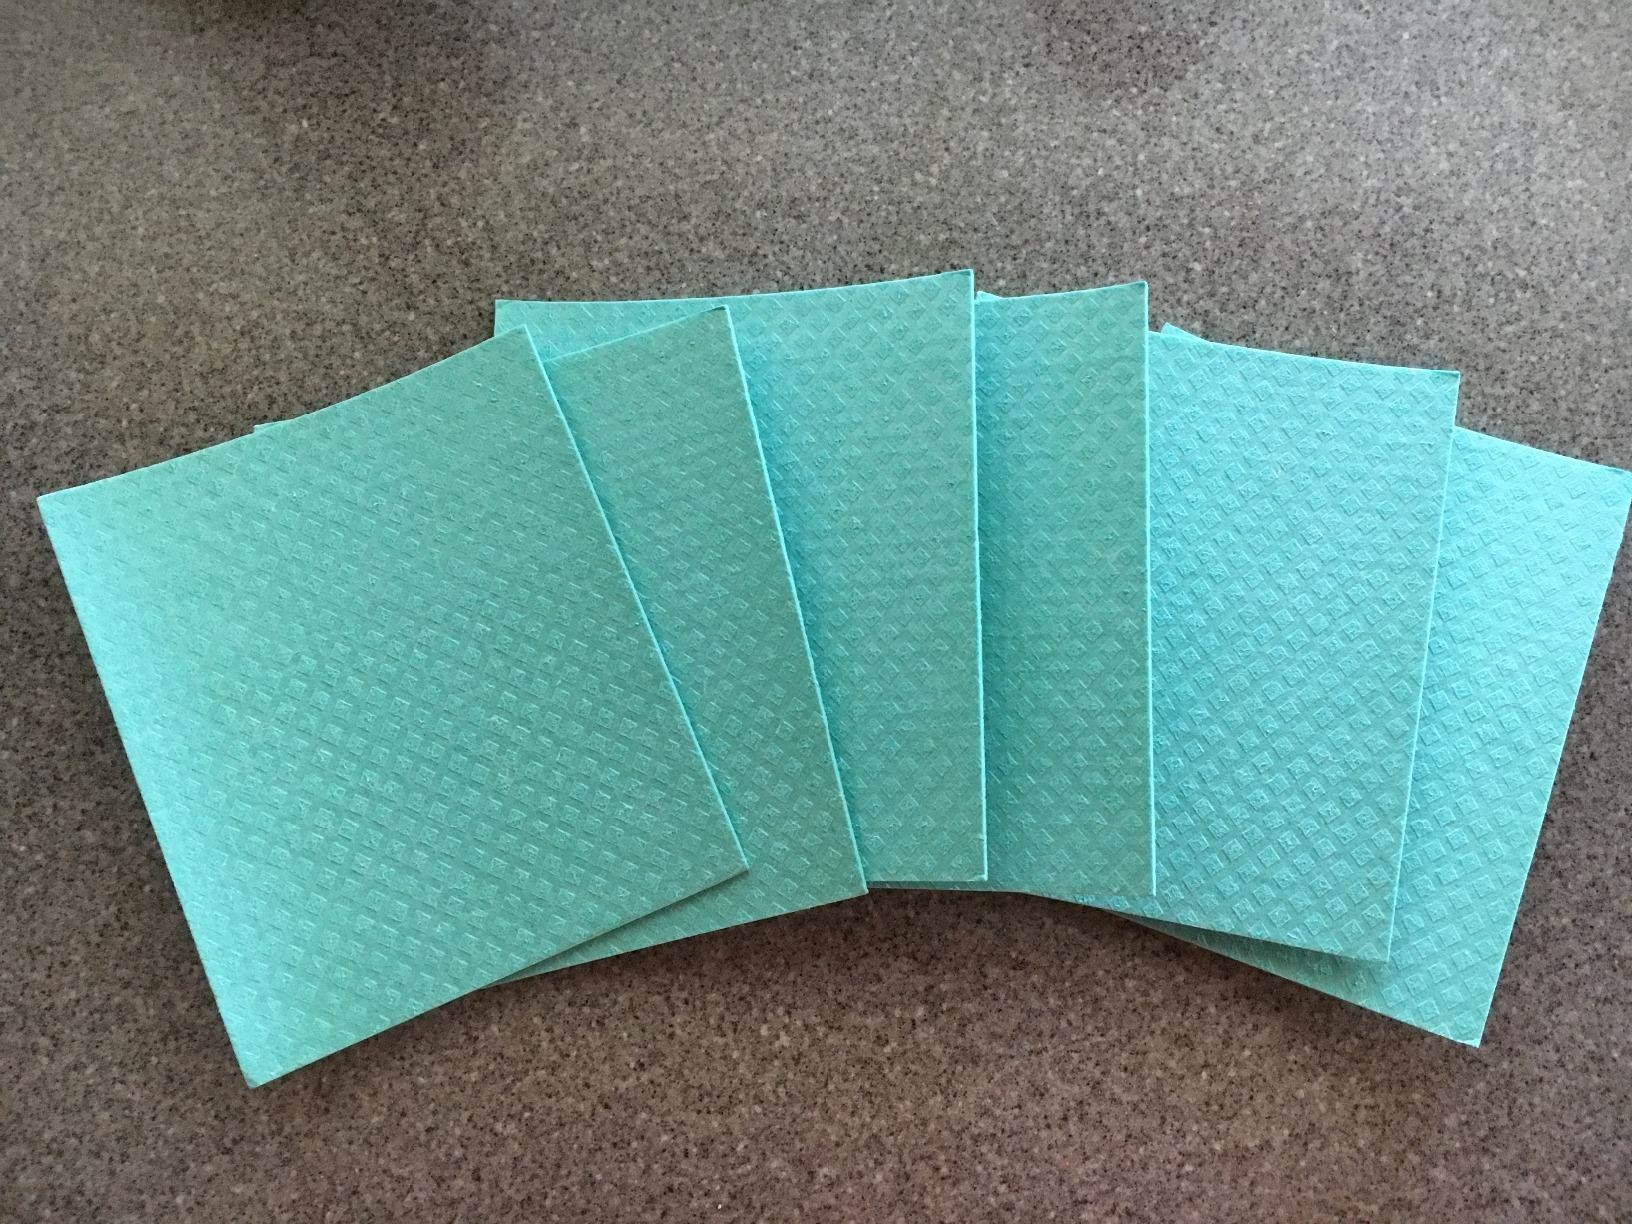 A set of the dishcloths in the teal color